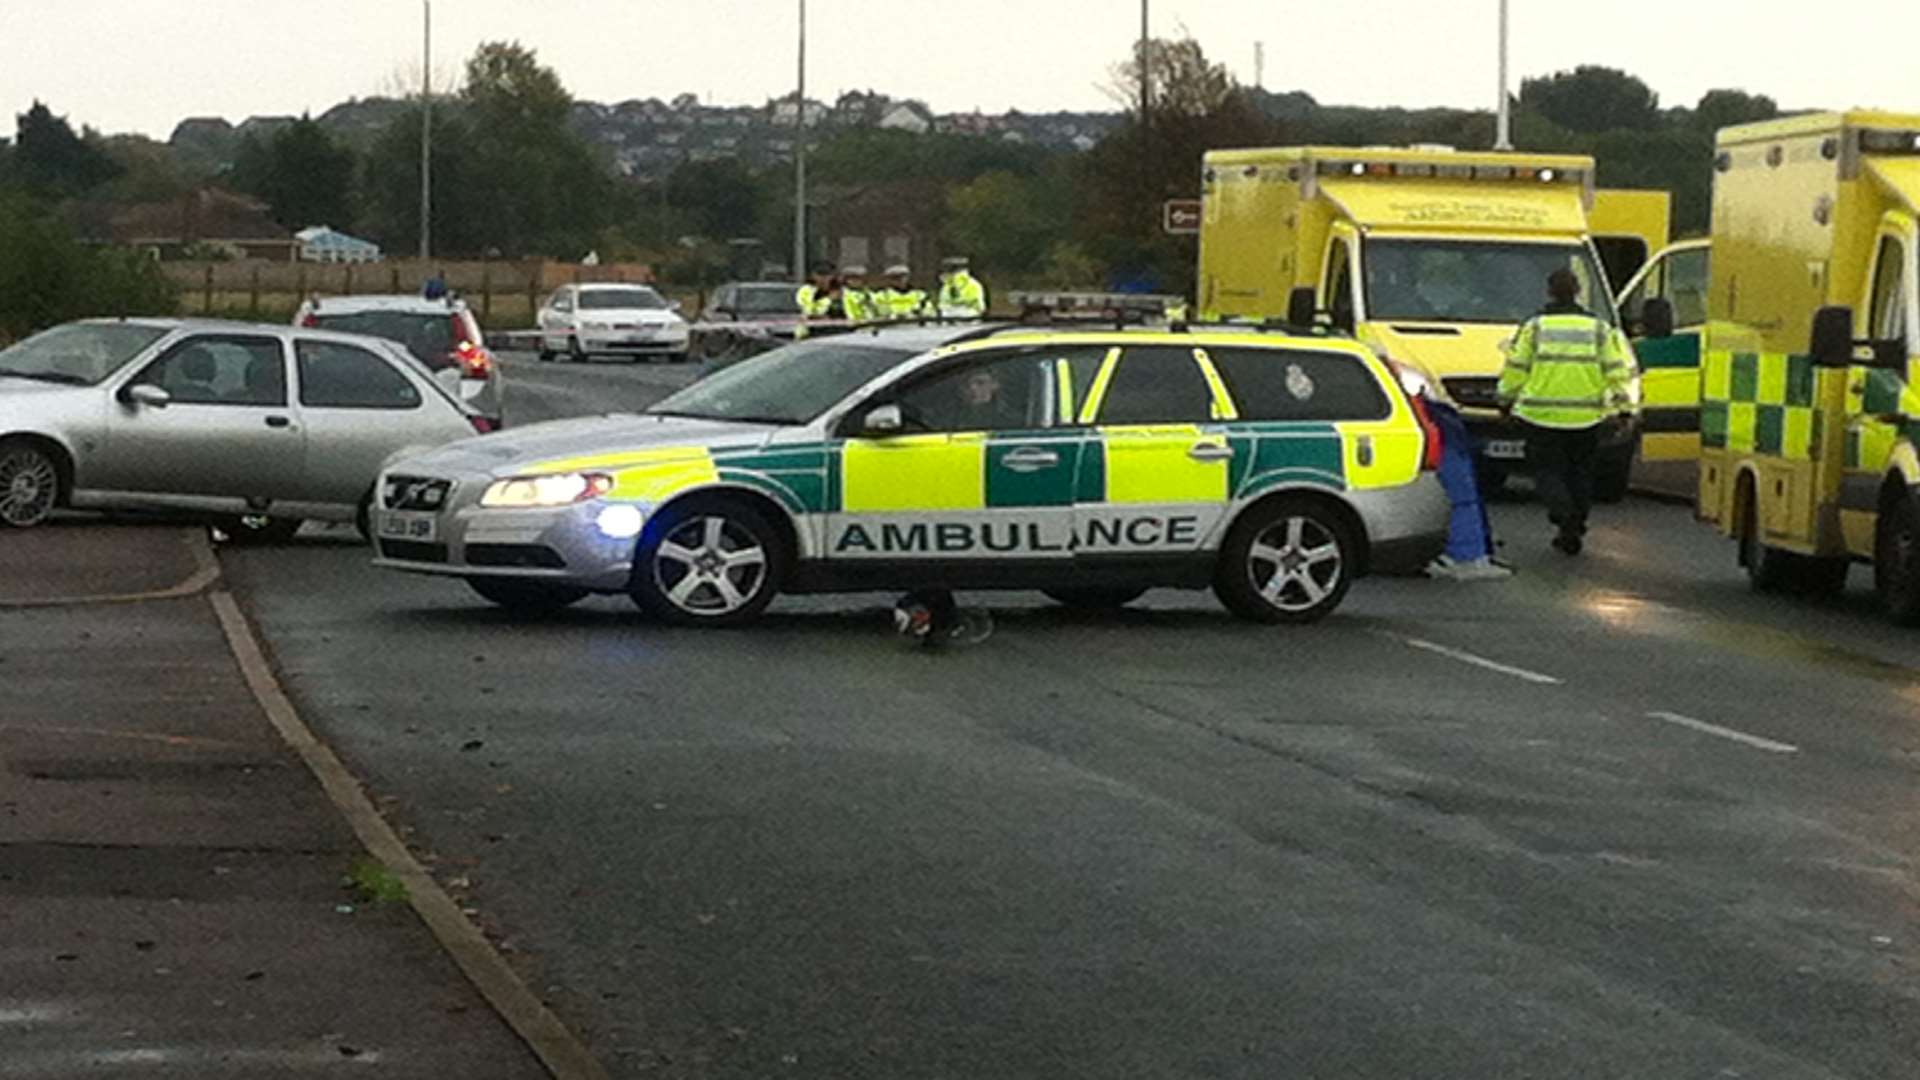 A man believed to be in his 70s died in the accident